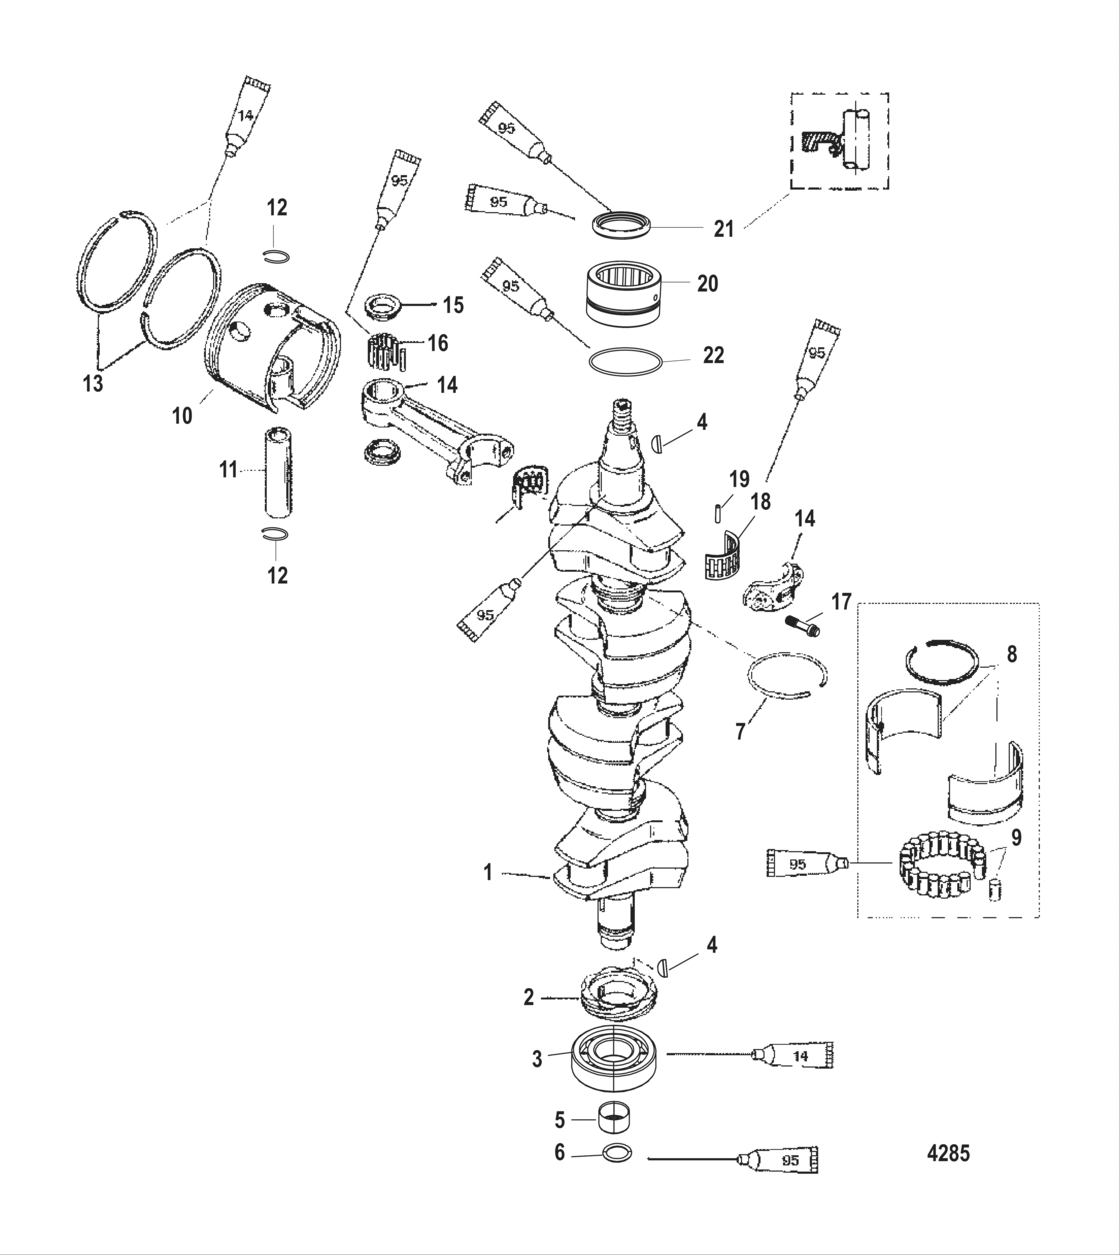 Crankshaft Pistons And Connecting Rods